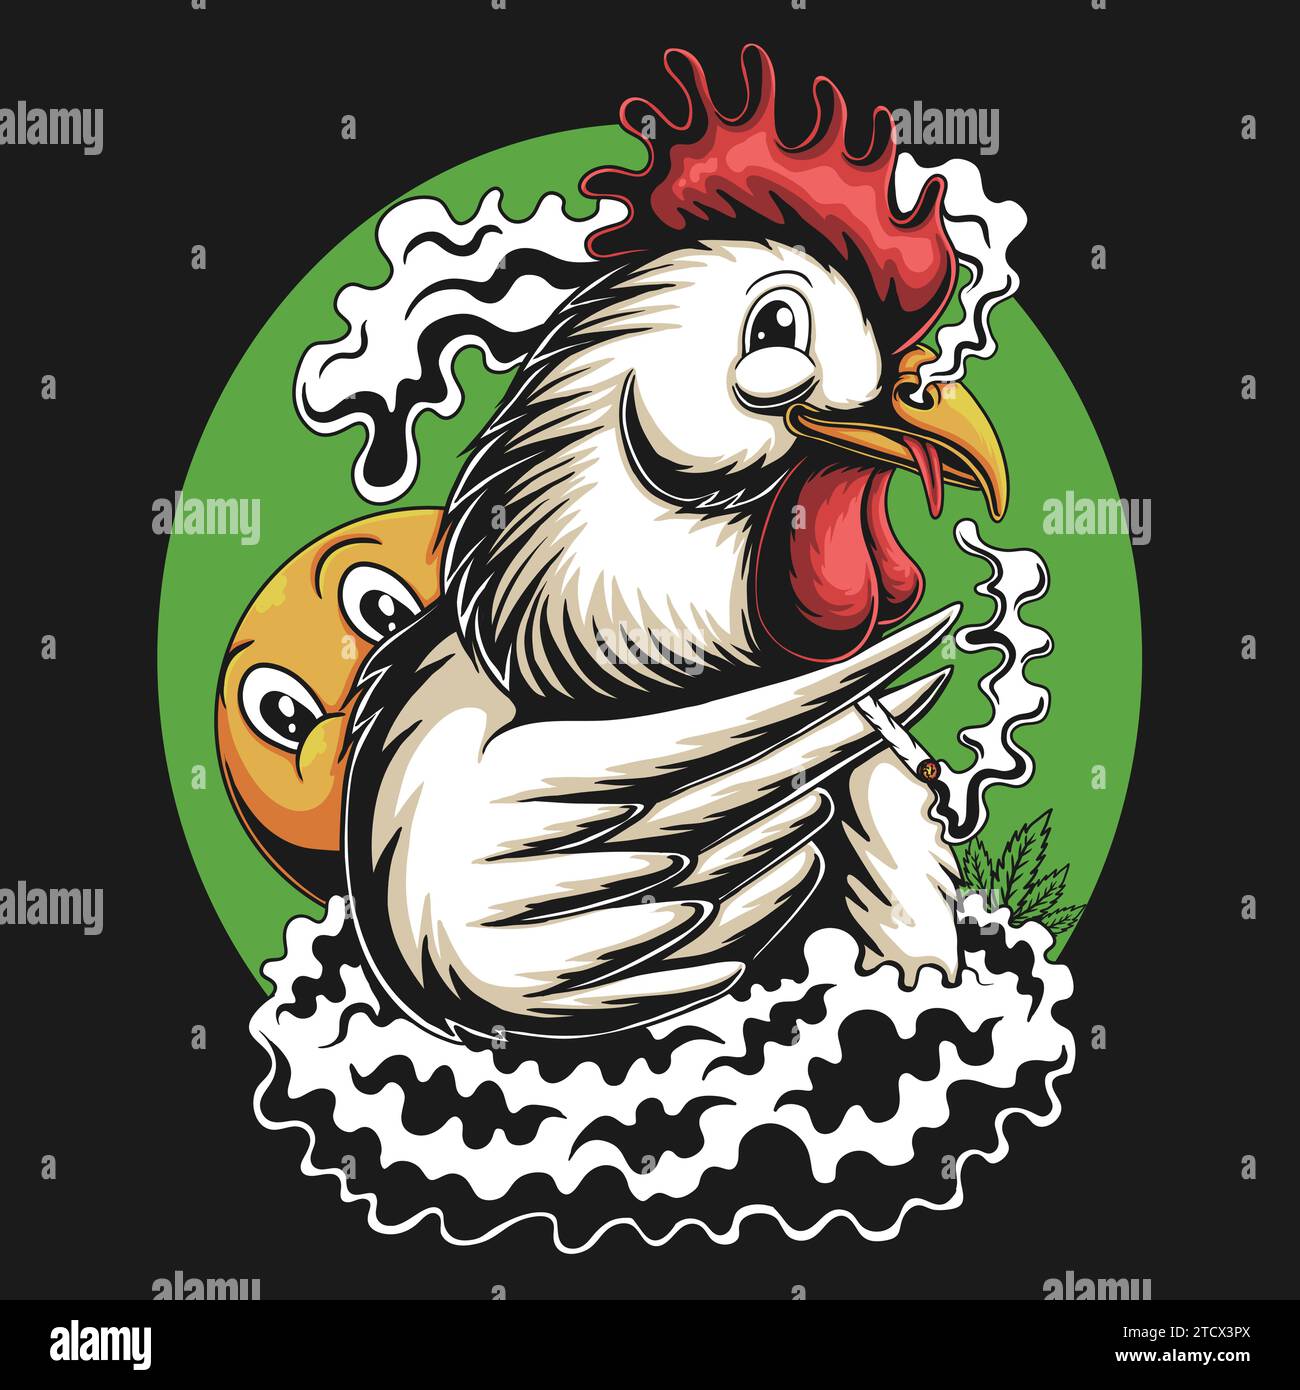 Chicken smoking weed vector illustration for your company or brand Stock Vector